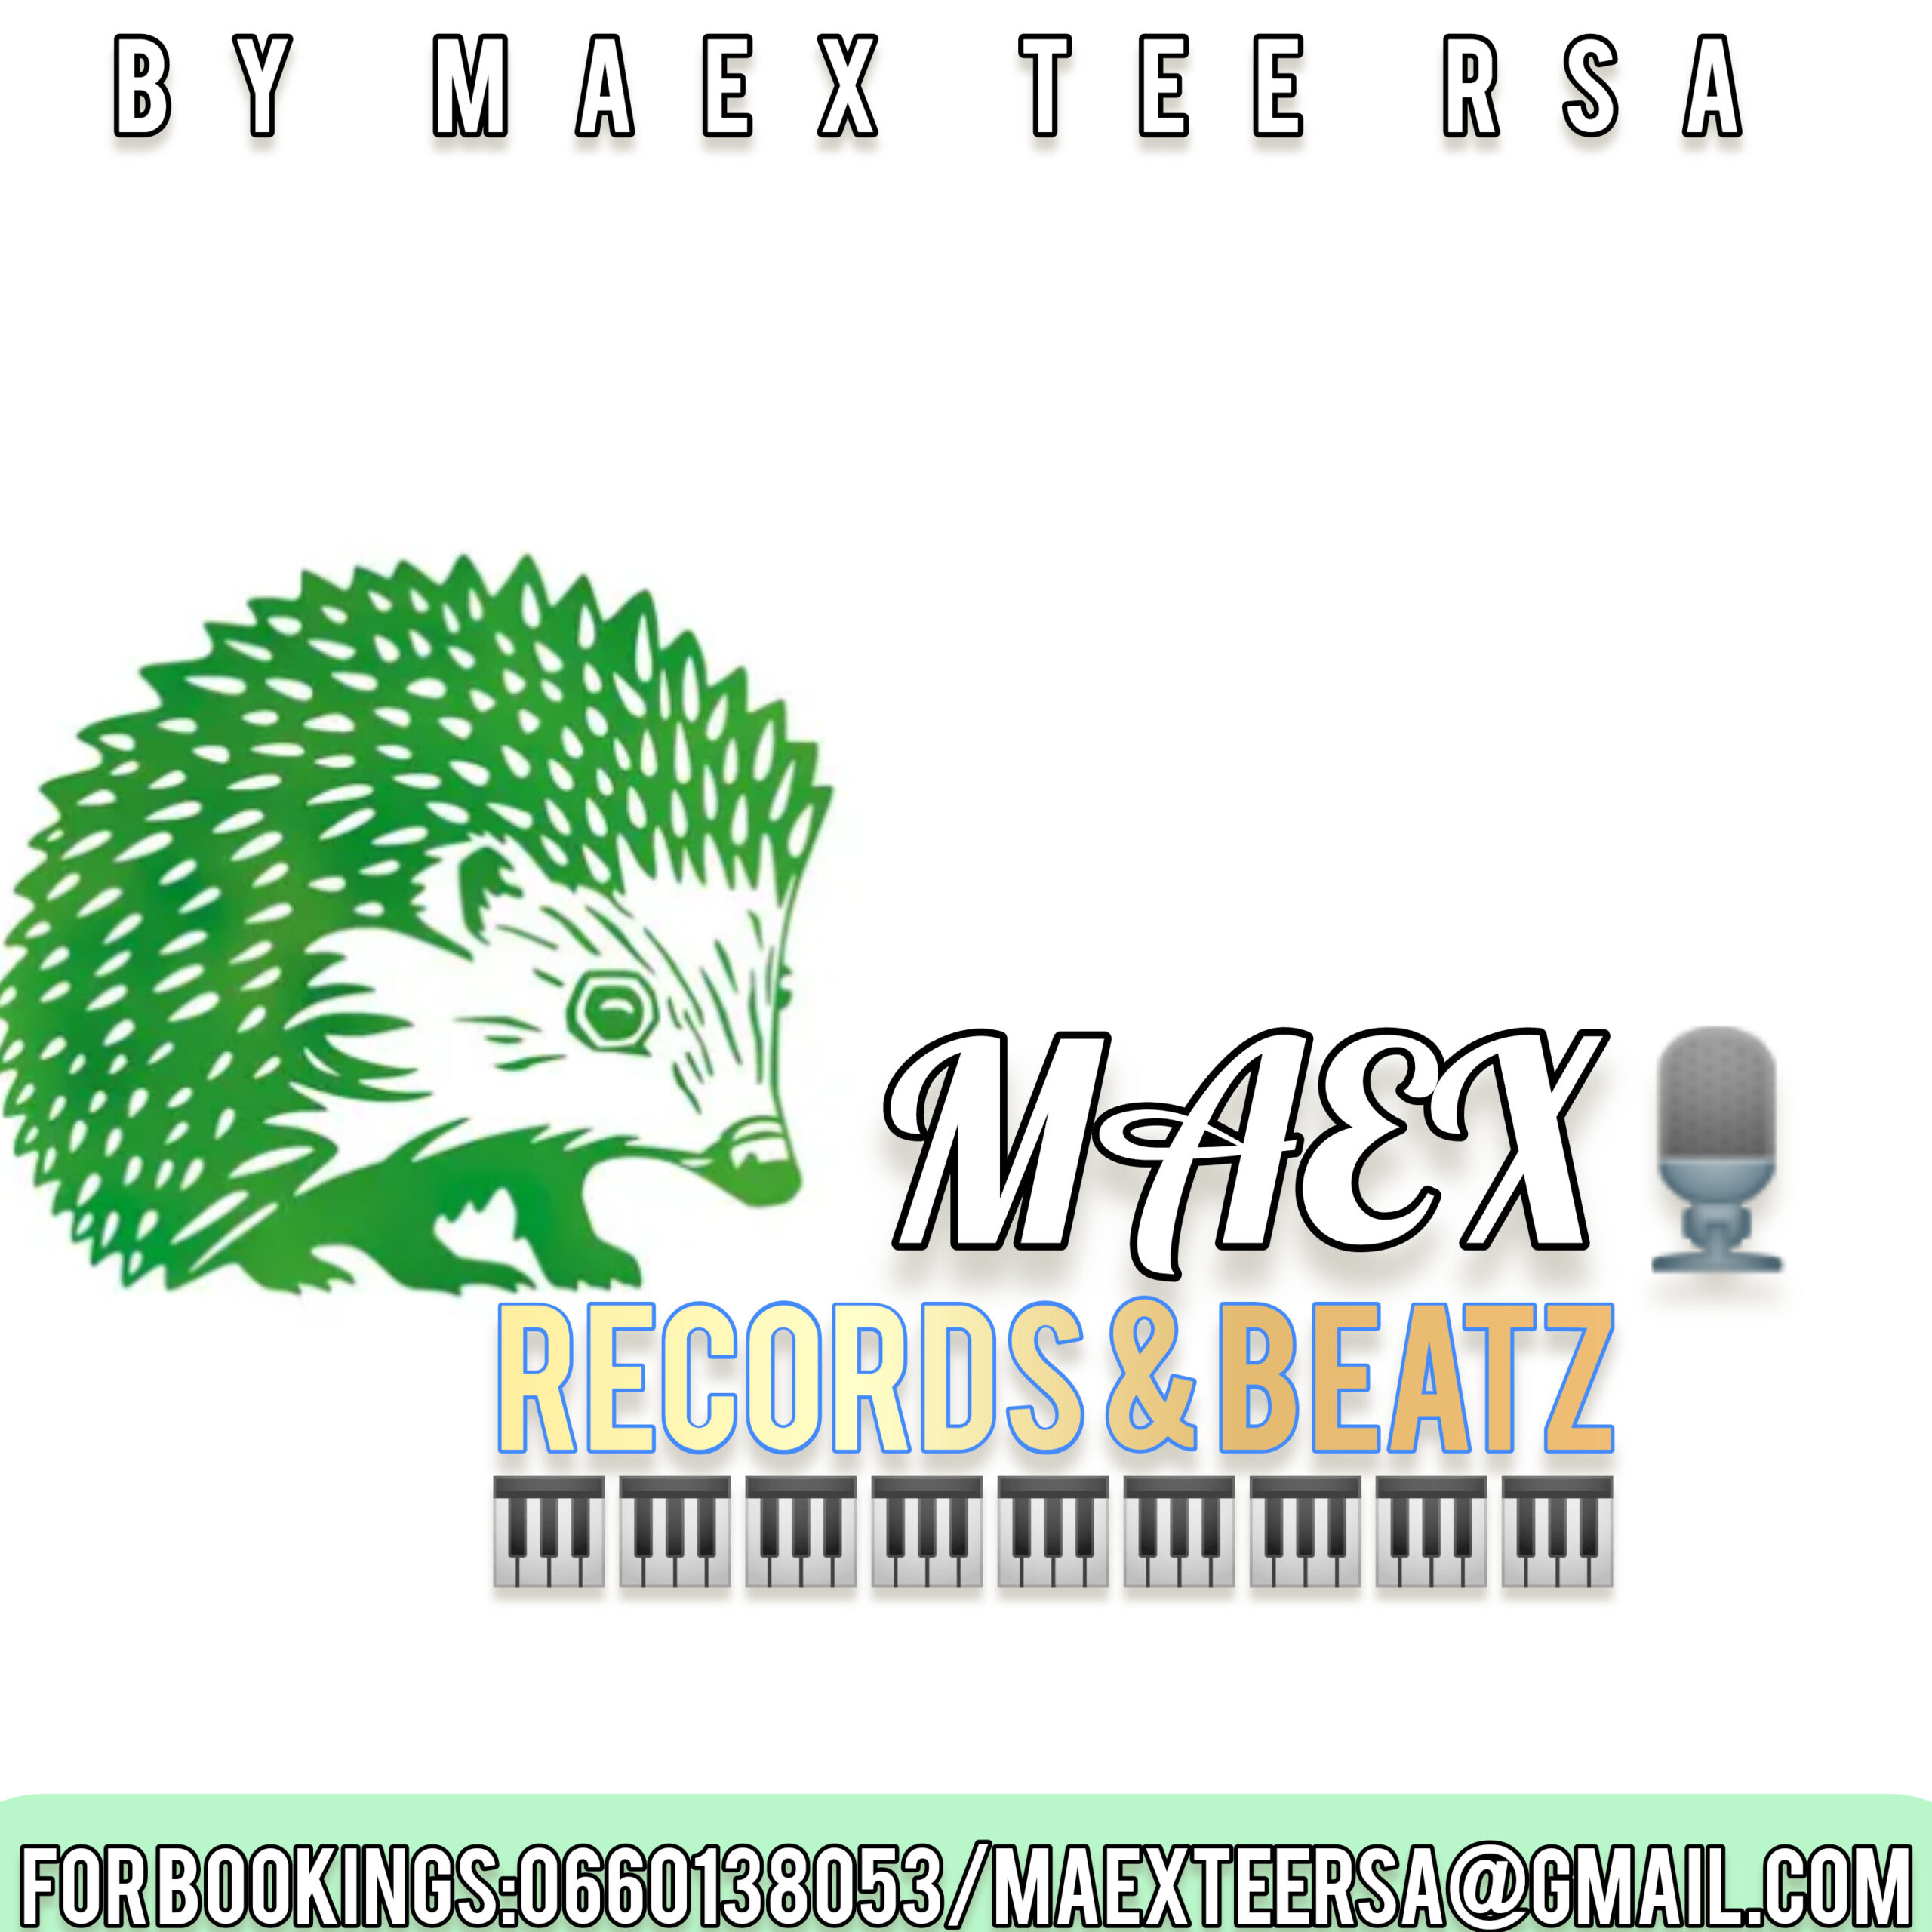 Amapiano_Demo_by_Maex Tee RSA